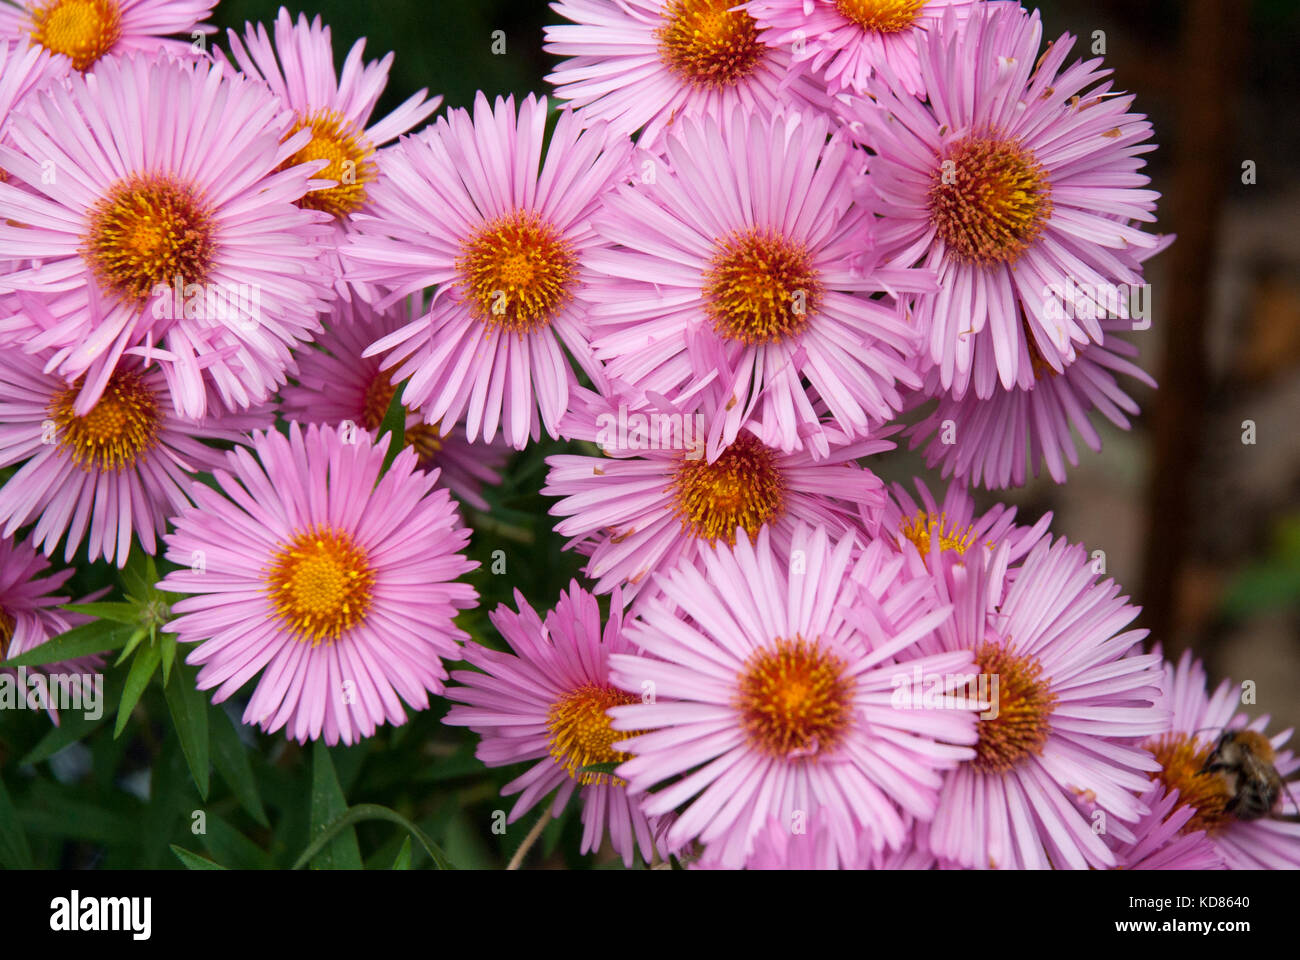 colourful bright pink asters/ michaelmas daisies Stock Photo